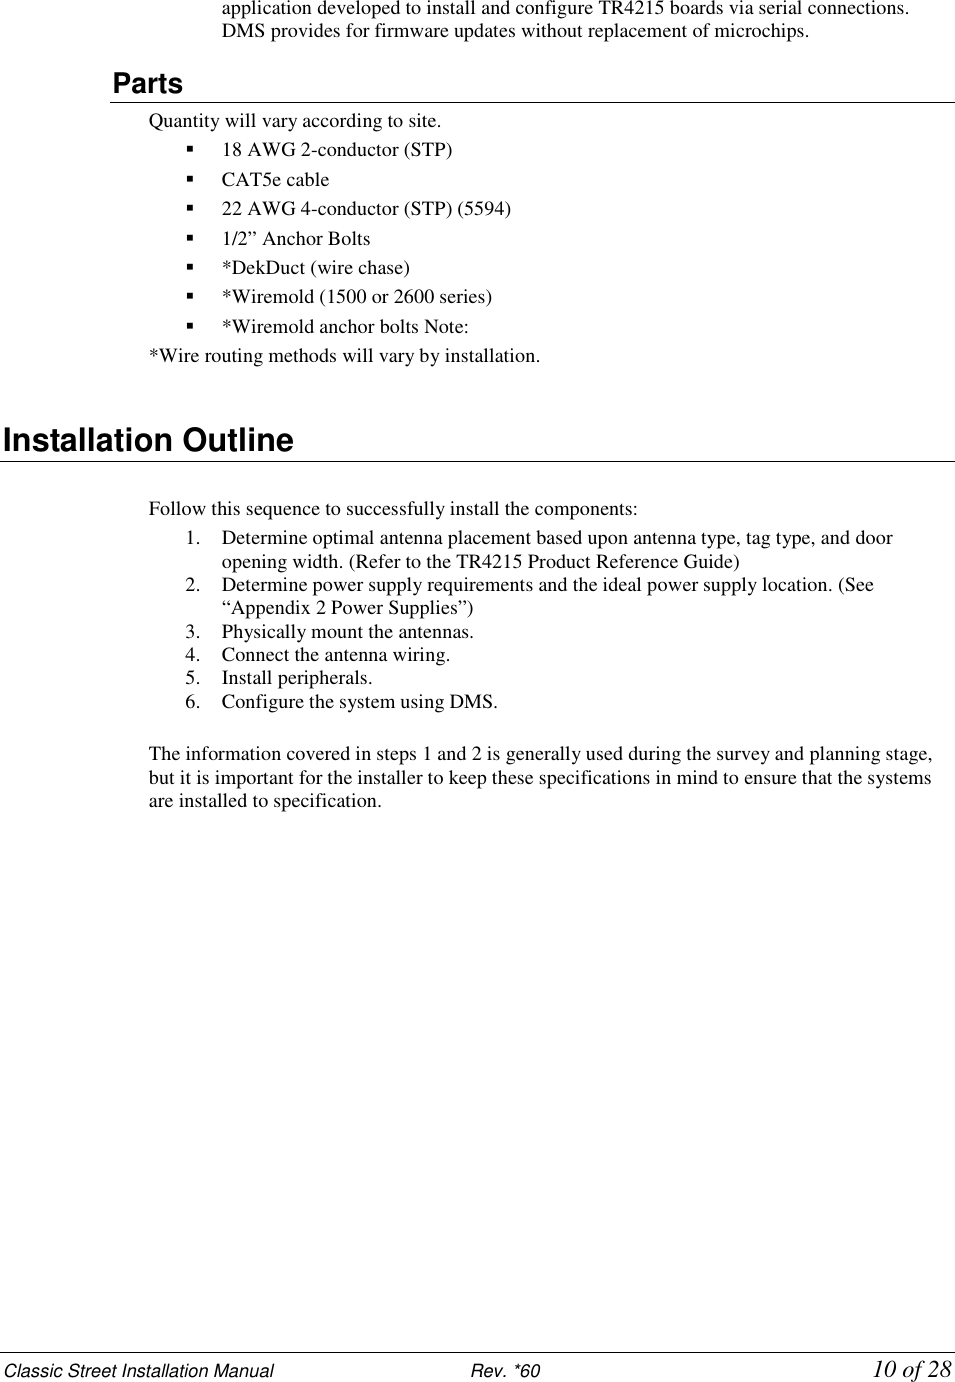 Classic Street Installation Manual                           Rev. *60           10 of 28 application developed to install and configure TR4215 boards via serial connections. DMS provides for firmware updates without replacement of microchips. Parts Quantity will vary according to site.  18 AWG 2-conductor (STP)  CAT5e cable  22 AWG 4-conductor (STP) (5594)   1/2” Anchor Bolts  *DekDuct (wire chase)  *Wiremold (1500 or 2600 series)  *Wiremold anchor bolts Note:  *Wire routing methods will vary by installation.  Installation Outline   Follow this sequence to successfully install the components:  1. Determine optimal antenna placement based upon antenna type, tag type, and door opening width. (Refer to the TR4215 Product Reference Guide) 2. Determine power supply requirements and the ideal power supply location. (See “Appendix 2 Power Supplies”)  3. Physically mount the antennas.  4. Connect the antenna wiring. 5. Install peripherals.  6. Configure the system using DMS.  The information covered in steps 1 and 2 is generally used during the survey and planning stage, but it is important for the installer to keep these specifications in mind to ensure that the systems are installed to specification.   